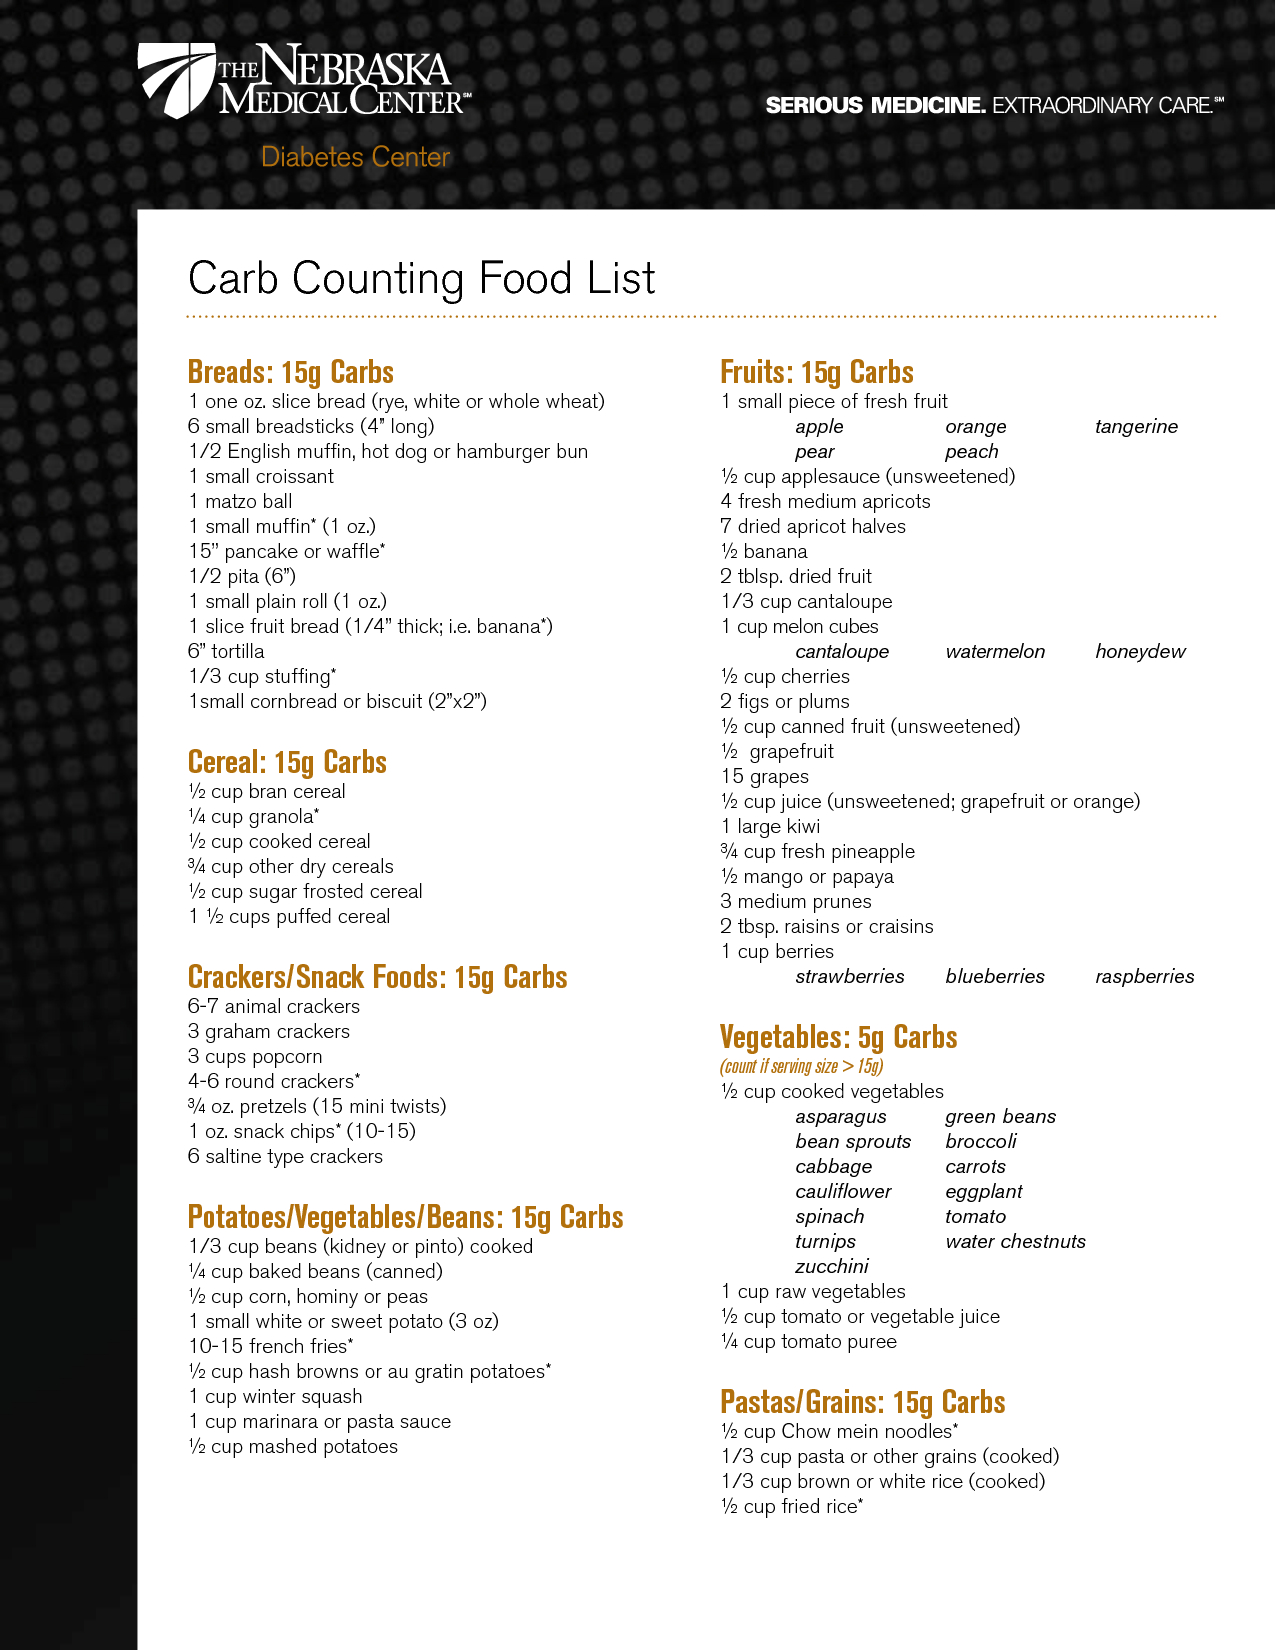 Low Carb Foods List Printable | Carb Counting Food List | Keto - Free Printable Carb Counter Chart